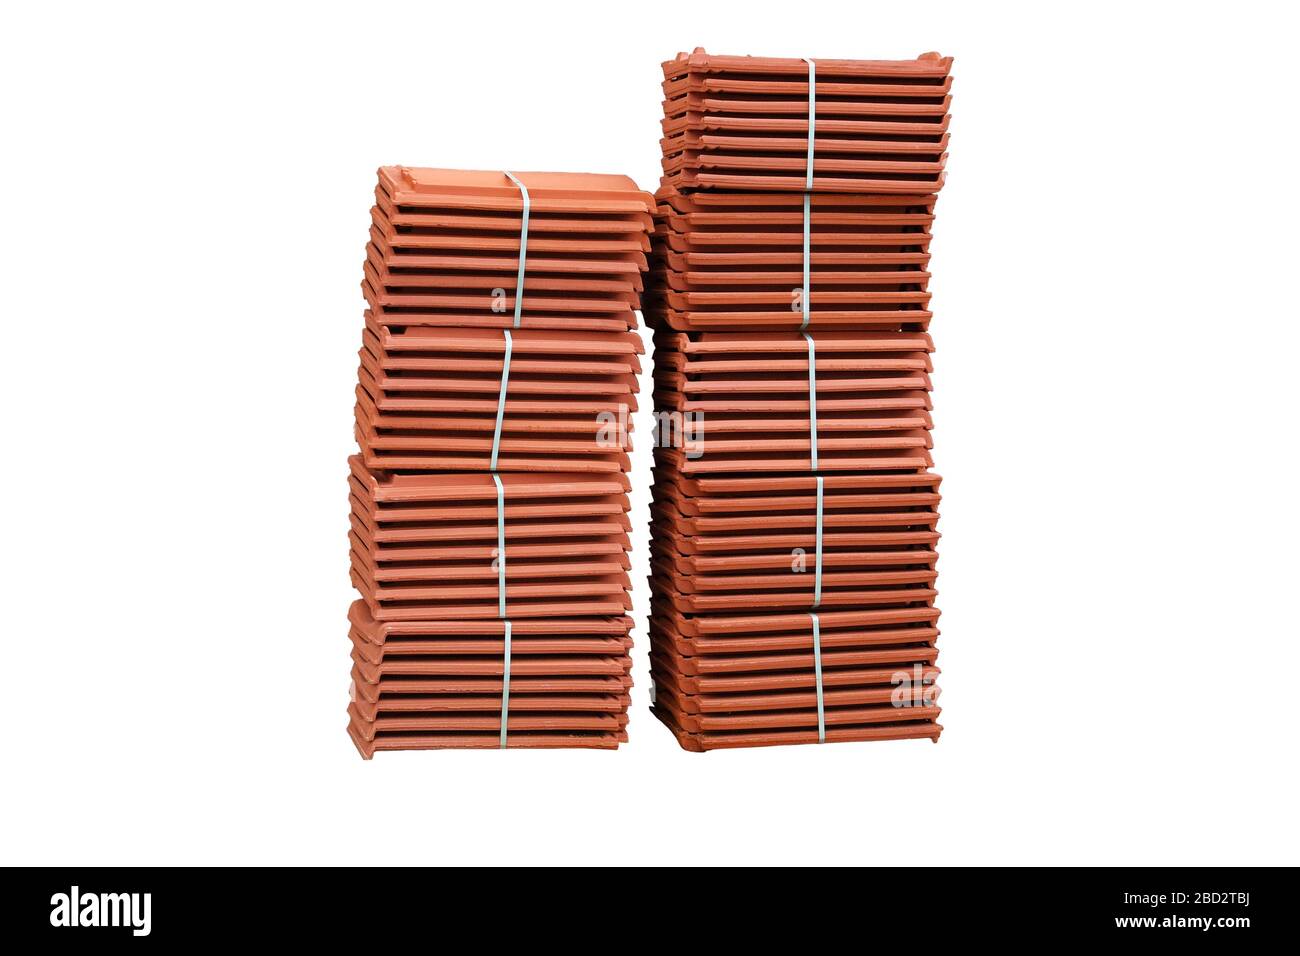 Pile of terracotta new roofing tiles packaged. Isolated on white background. Stock Photo